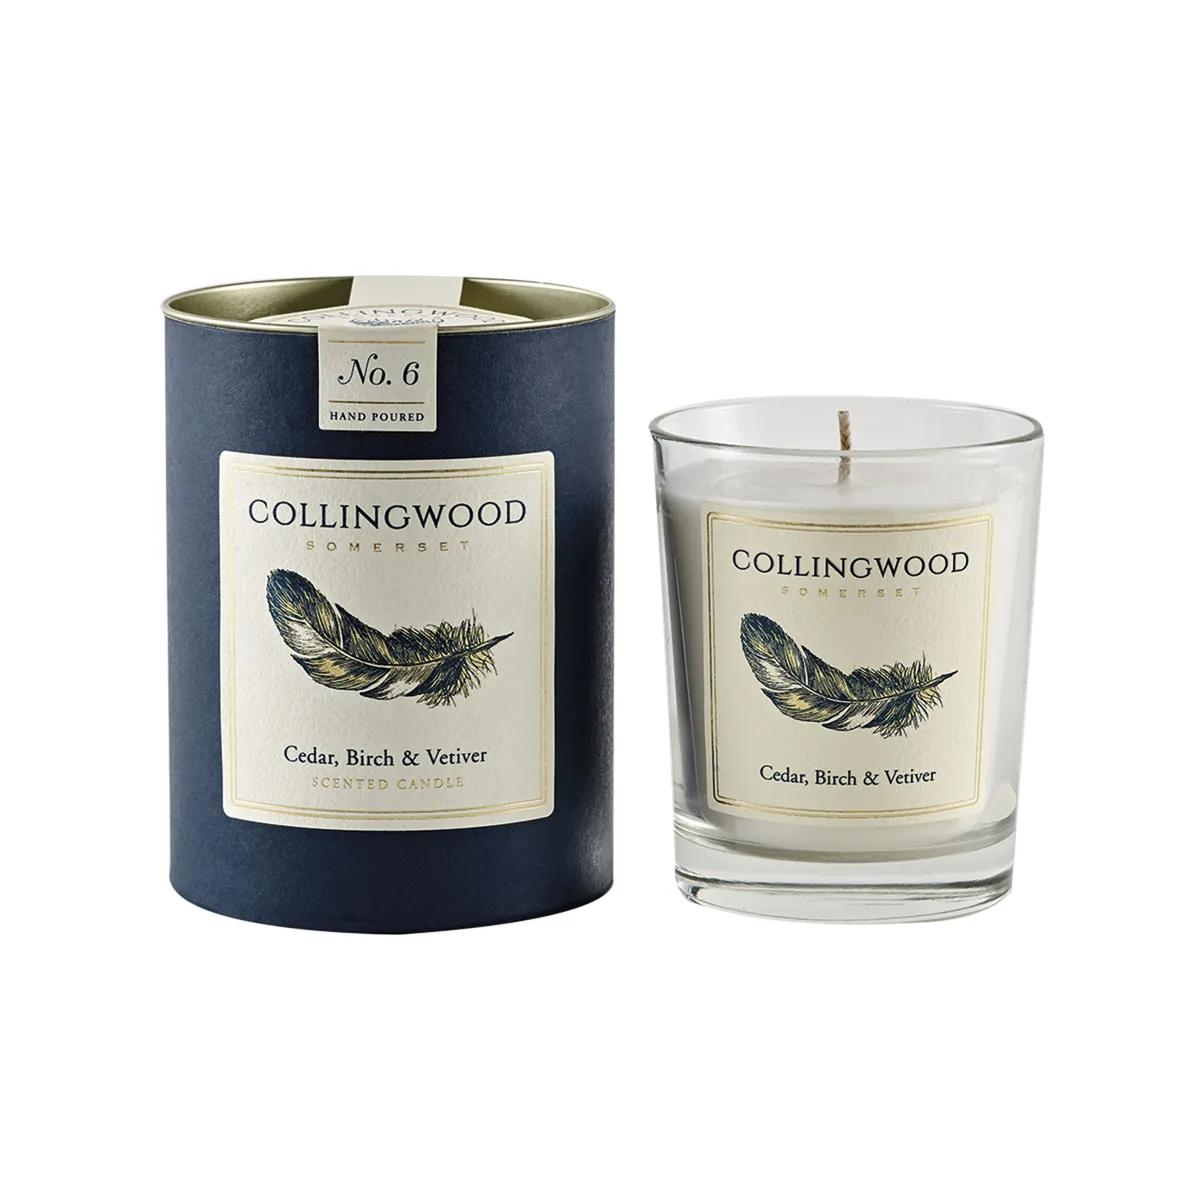 Cedar, birch and vetiver candle, £38, Collingwood of Somerset